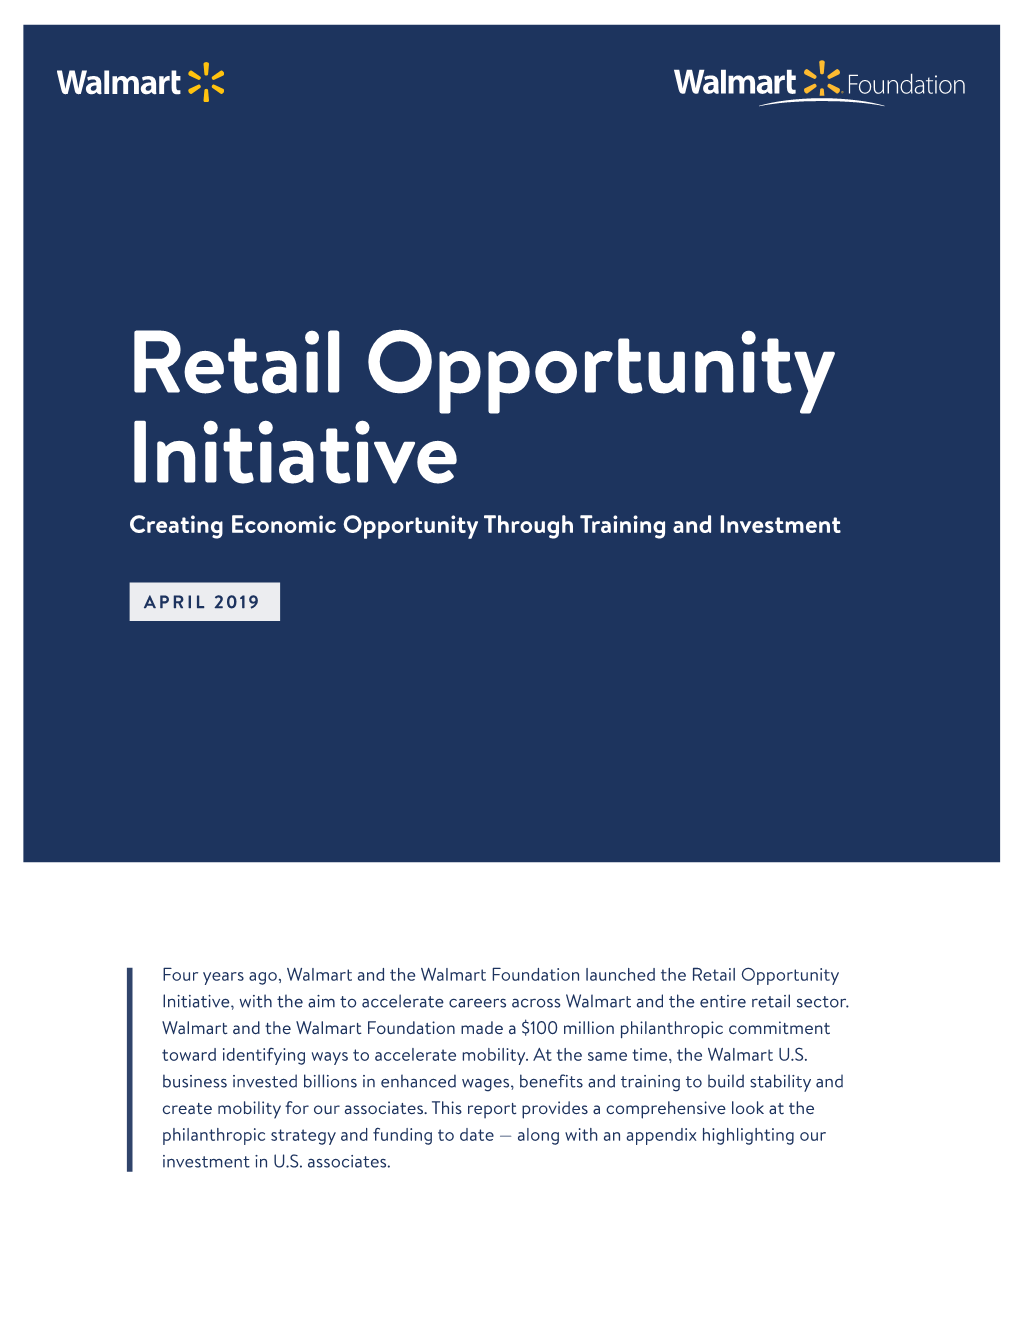 Retail Opportunity Initiative Creating Economic Opportunity Through Training and Investment